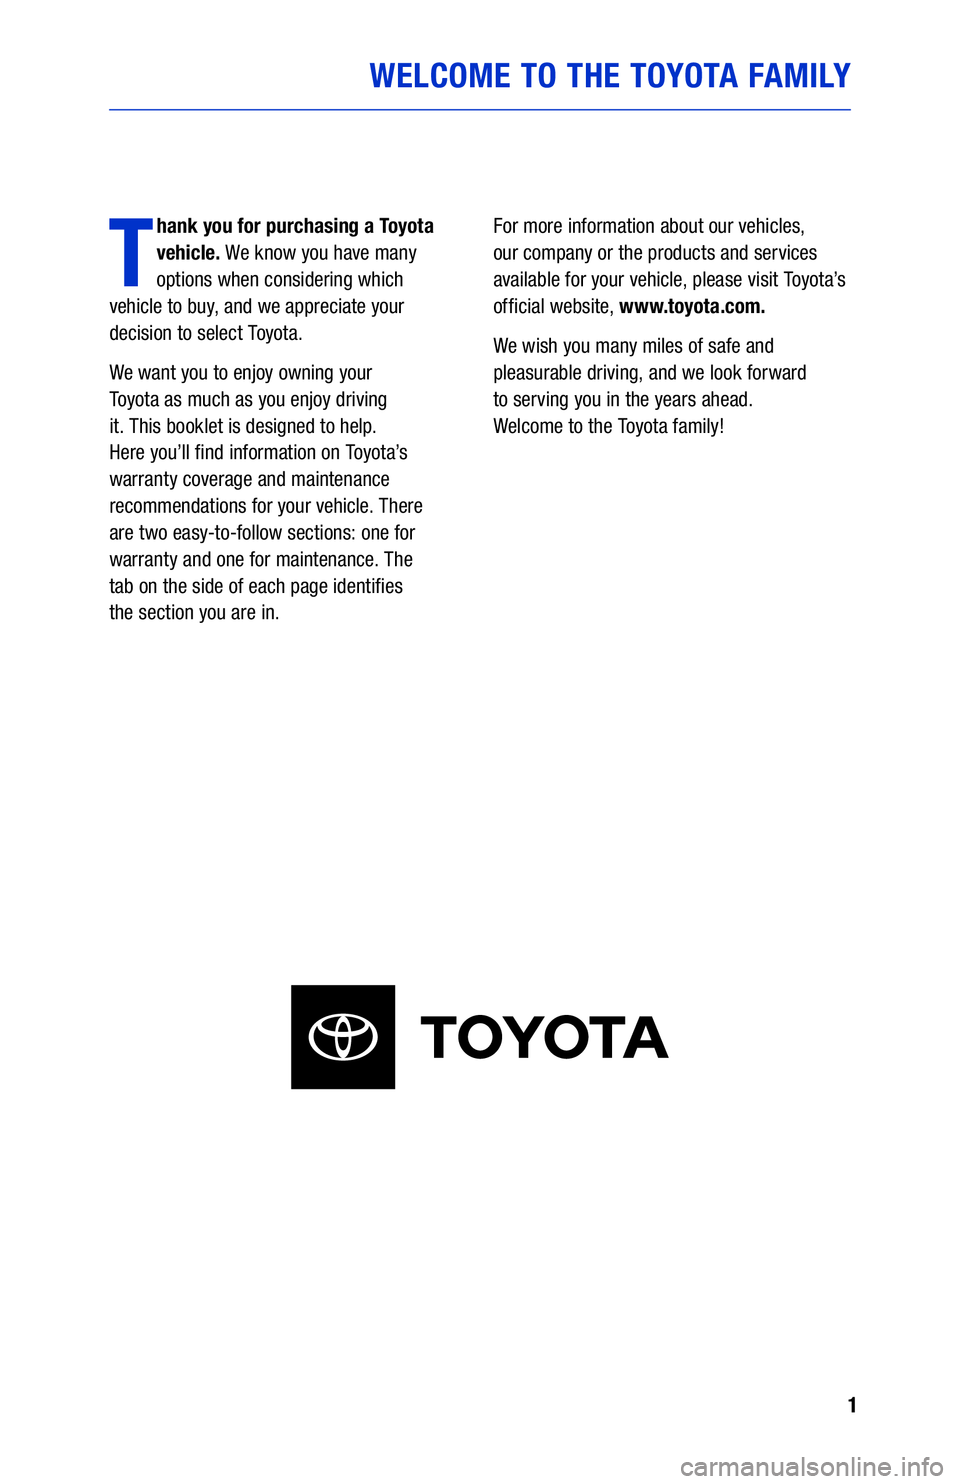 TOYOTA COROLLA HATCHBACK 2021  Warranties & Maintenance Guides (in English) 1
WELCOME TO THE TOYOTA FAMILY
T
hank you for purchasing a Toyota 
vehicle. We know you have many 
options when considering which  
vehicle to buy, and we appreciate your 
decision to select Toyota.
W